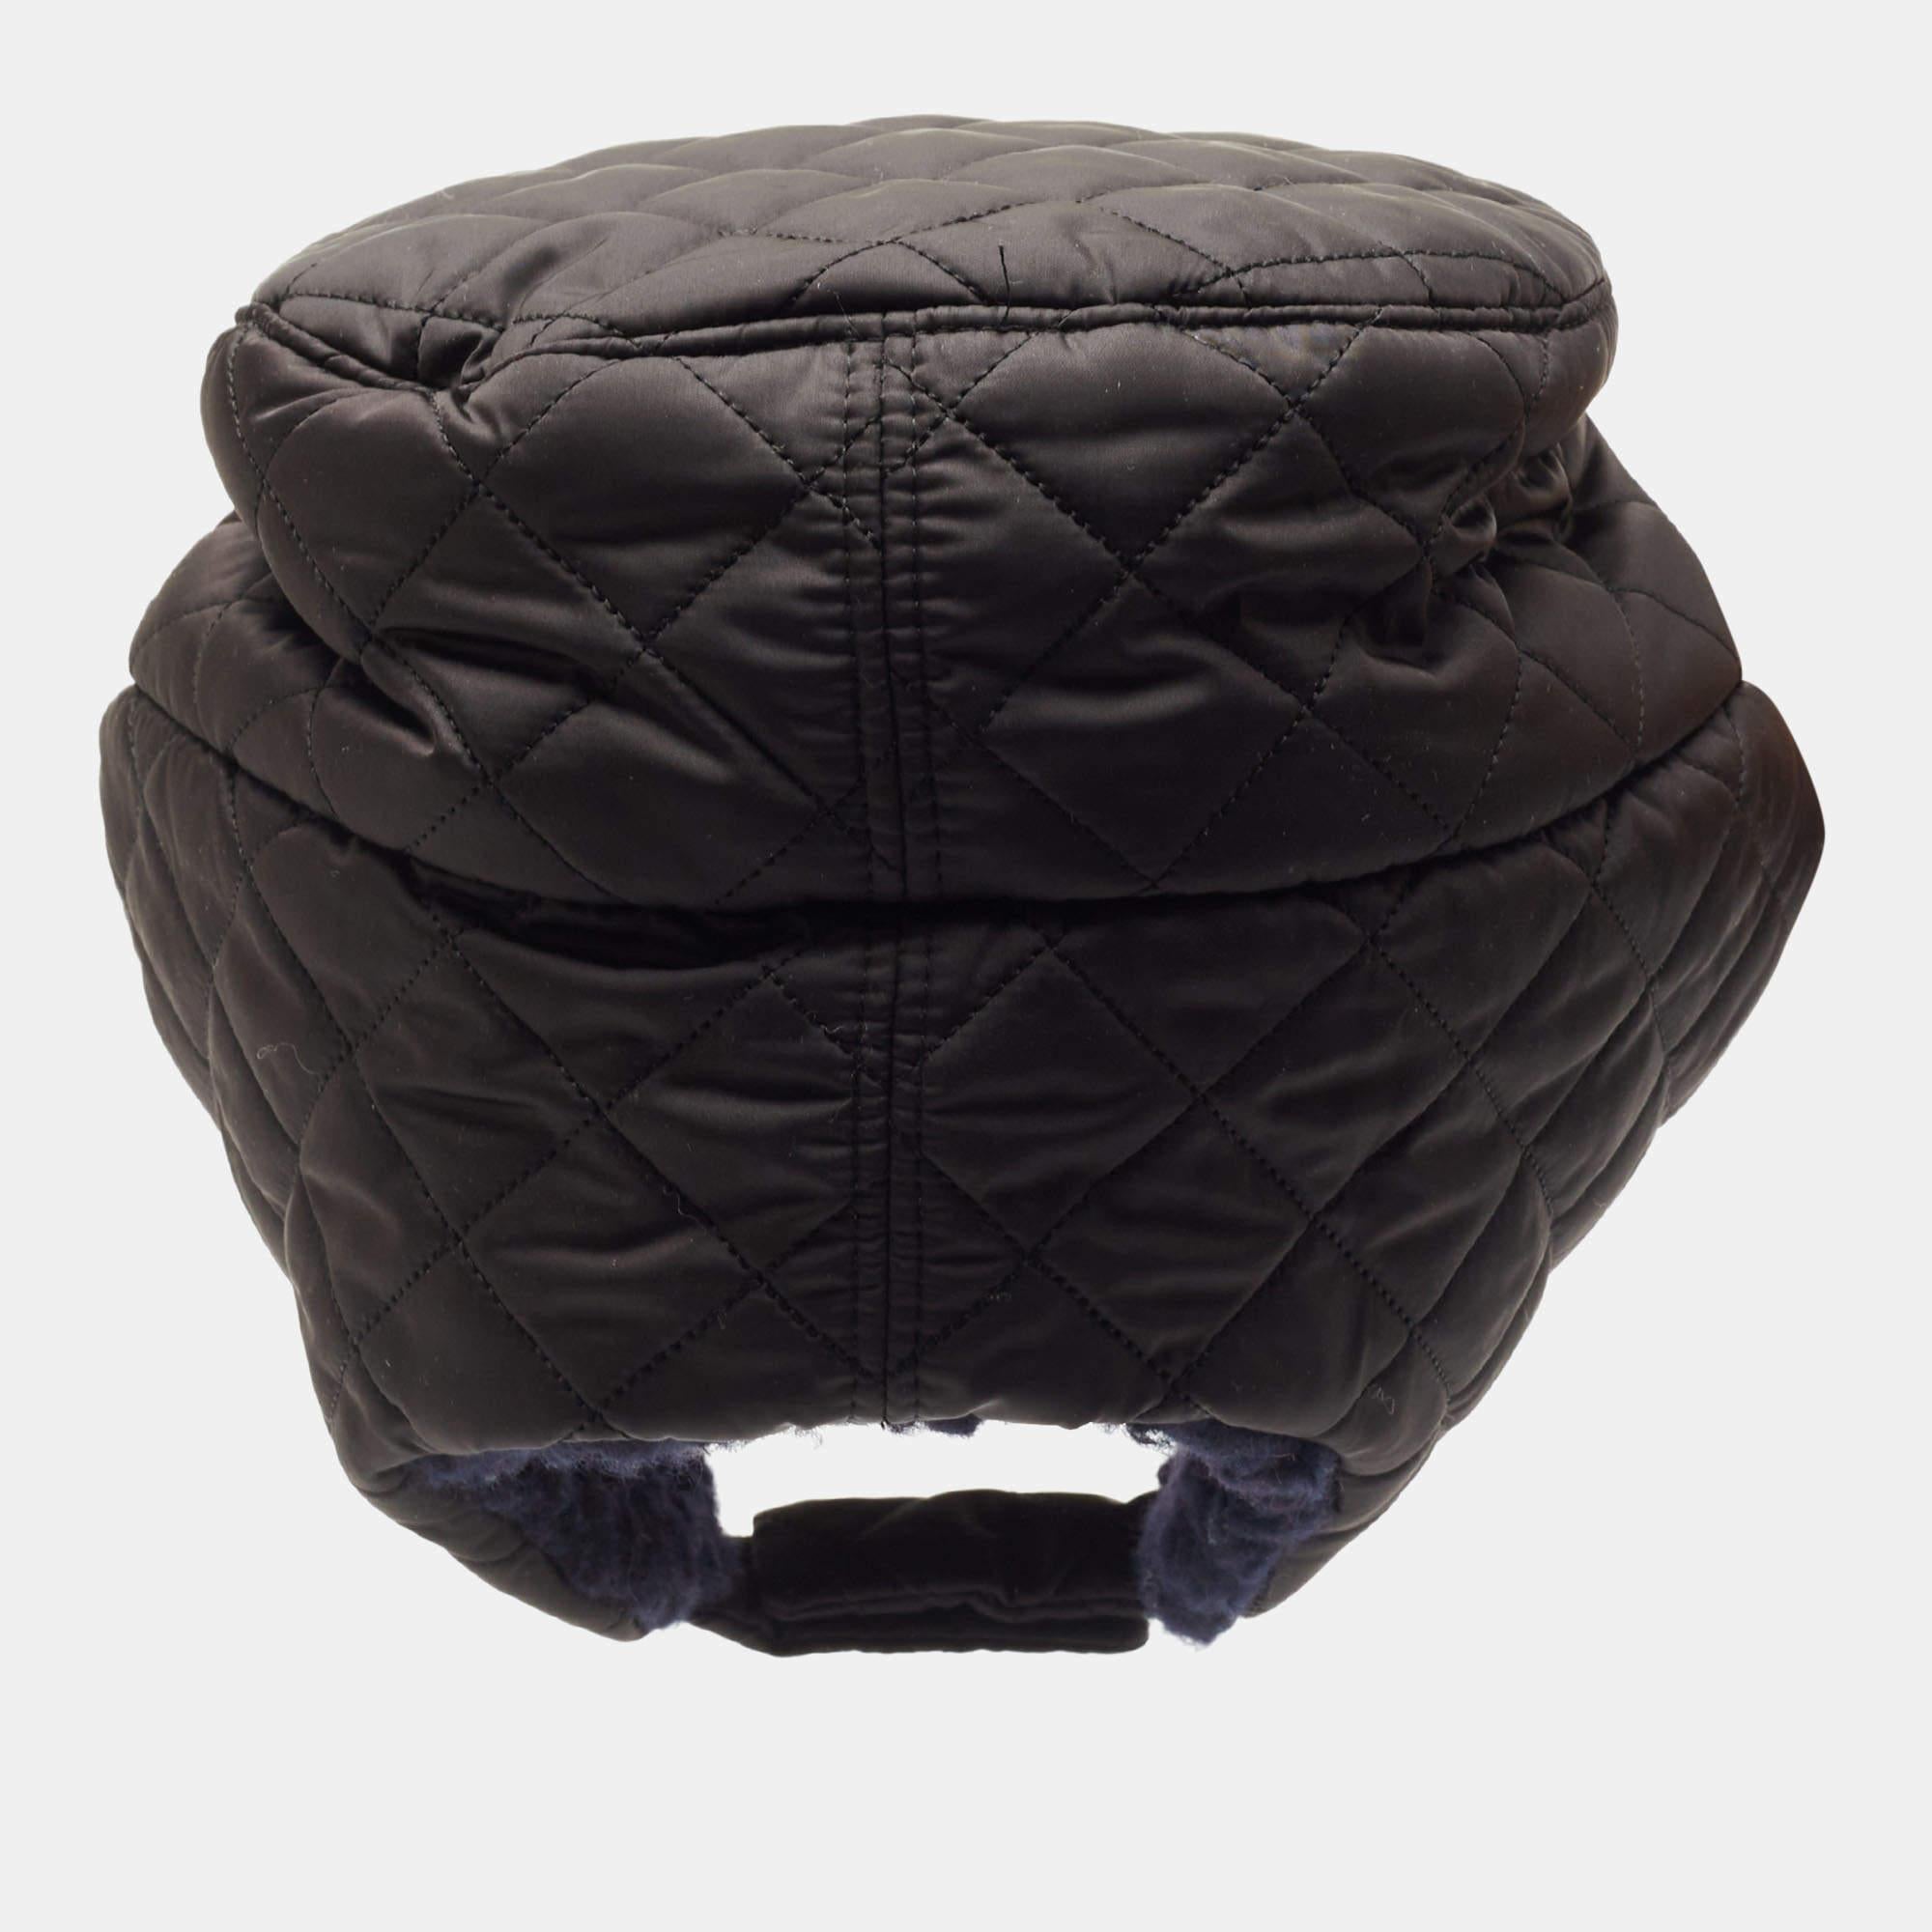 Chanel offers a fashionable addition to your style repertoire with this coco neige trapper hat. It is covered in the diamond quilt and finished with a signature patch on the front.

